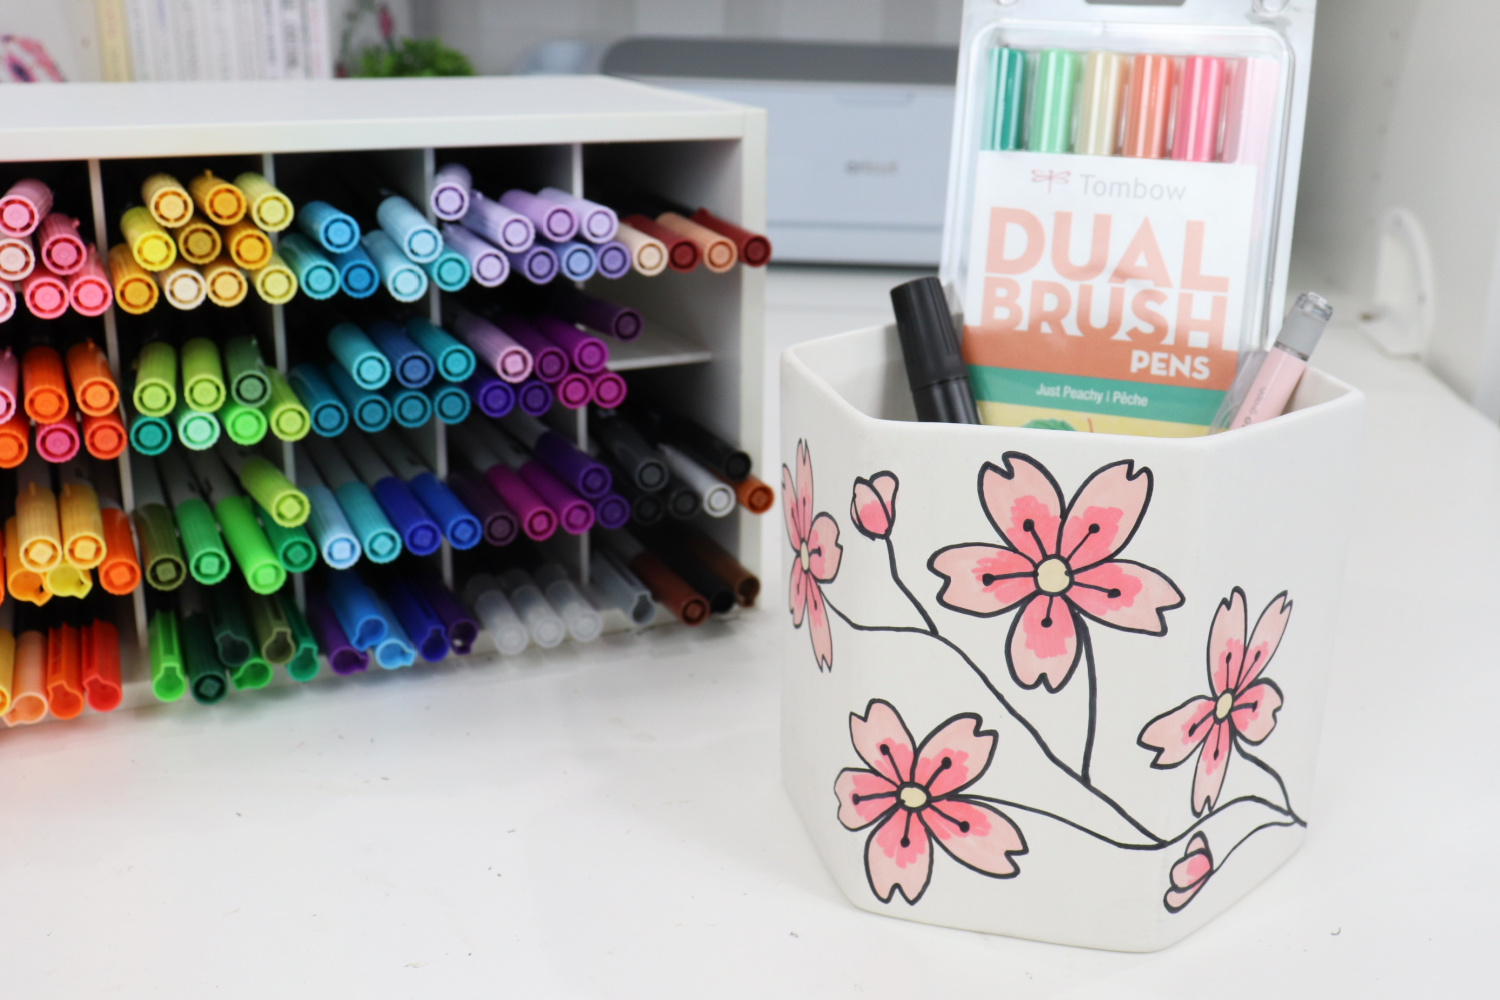 Image contains the finished planter, with a pack of Dual Brush Pens, a black marker, and a pink pencil inside of it. An organizer filled with colored markers sits nearby.